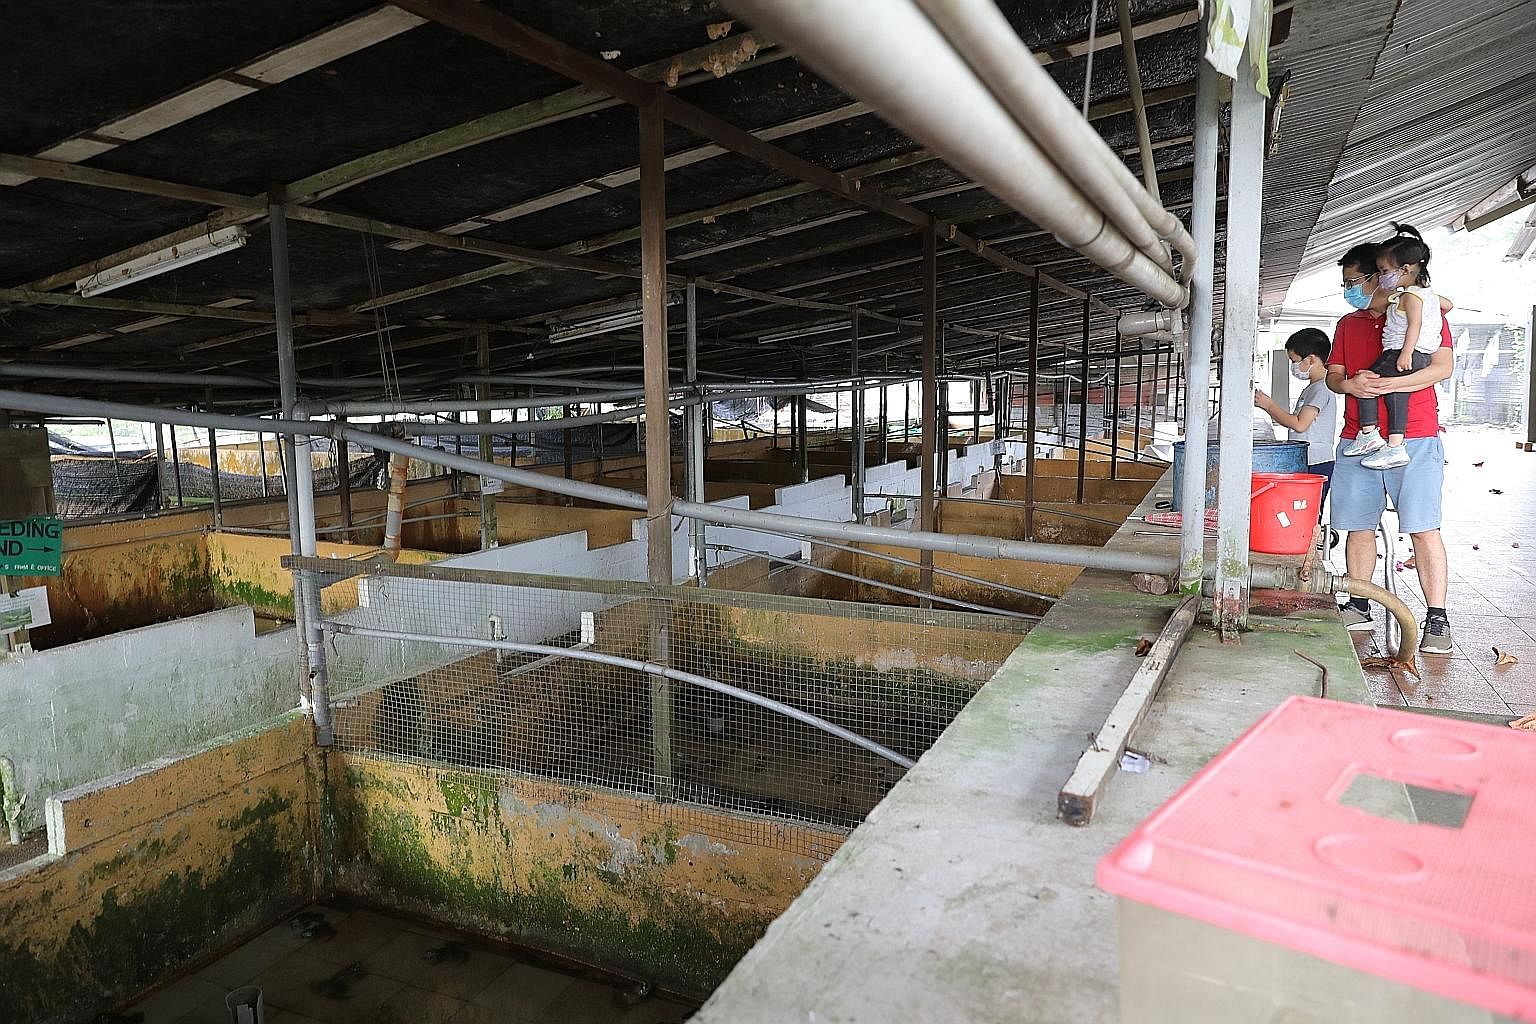 Ms Jean Woon, manager of Ser Poh Farm, which will be moving from Lim Chu Kang to a new plot in Sungei Tengah. The farm plans to double its beansprout output through the use of technology such as auto-irrigation systems. PHOTO: SINGAPORE FOOD AGENCY A